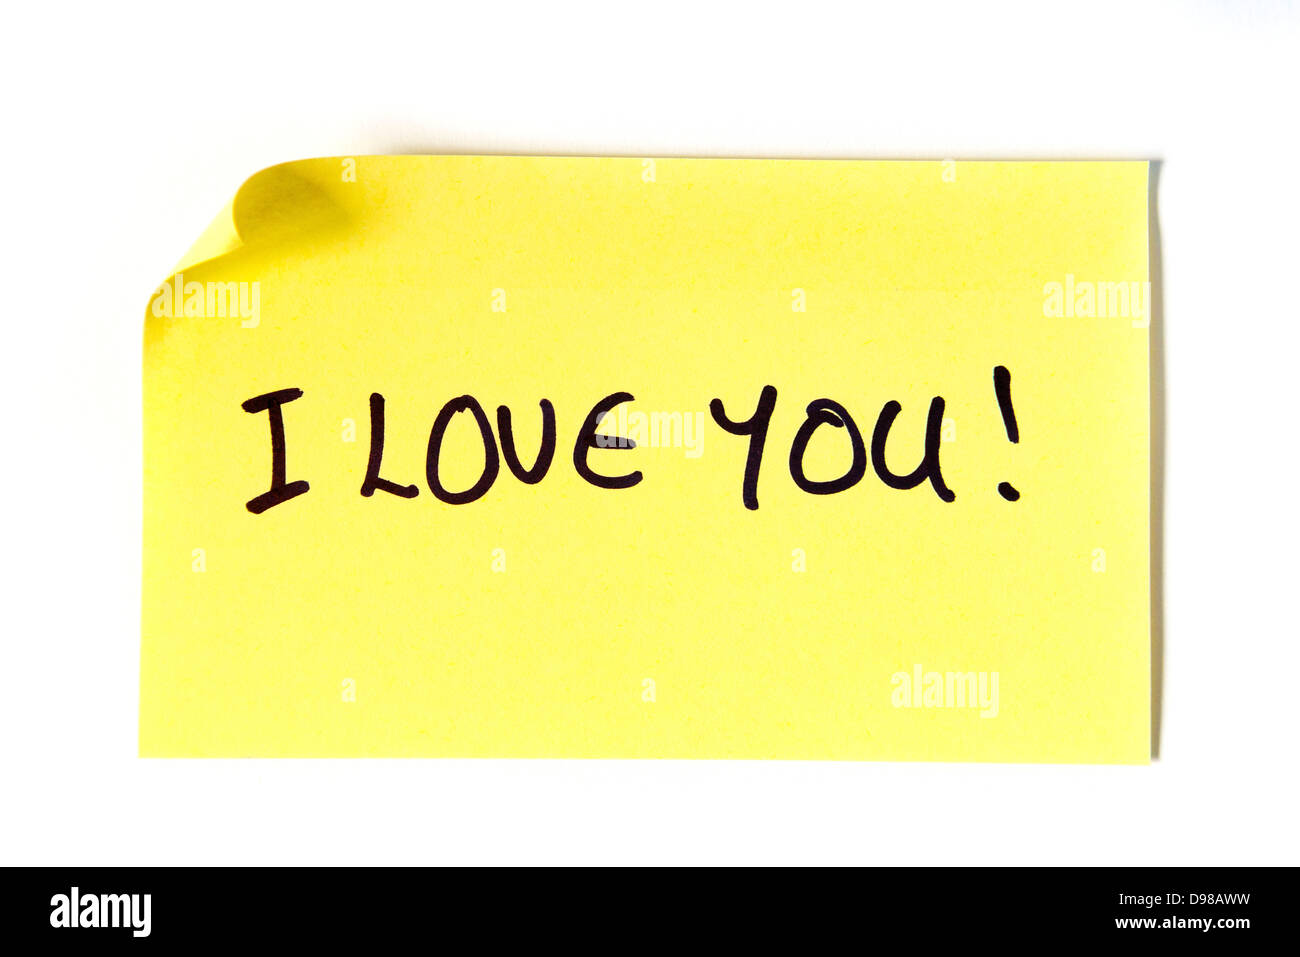 I love you! Written in capital letters on a yellow post it note. Stock Photo